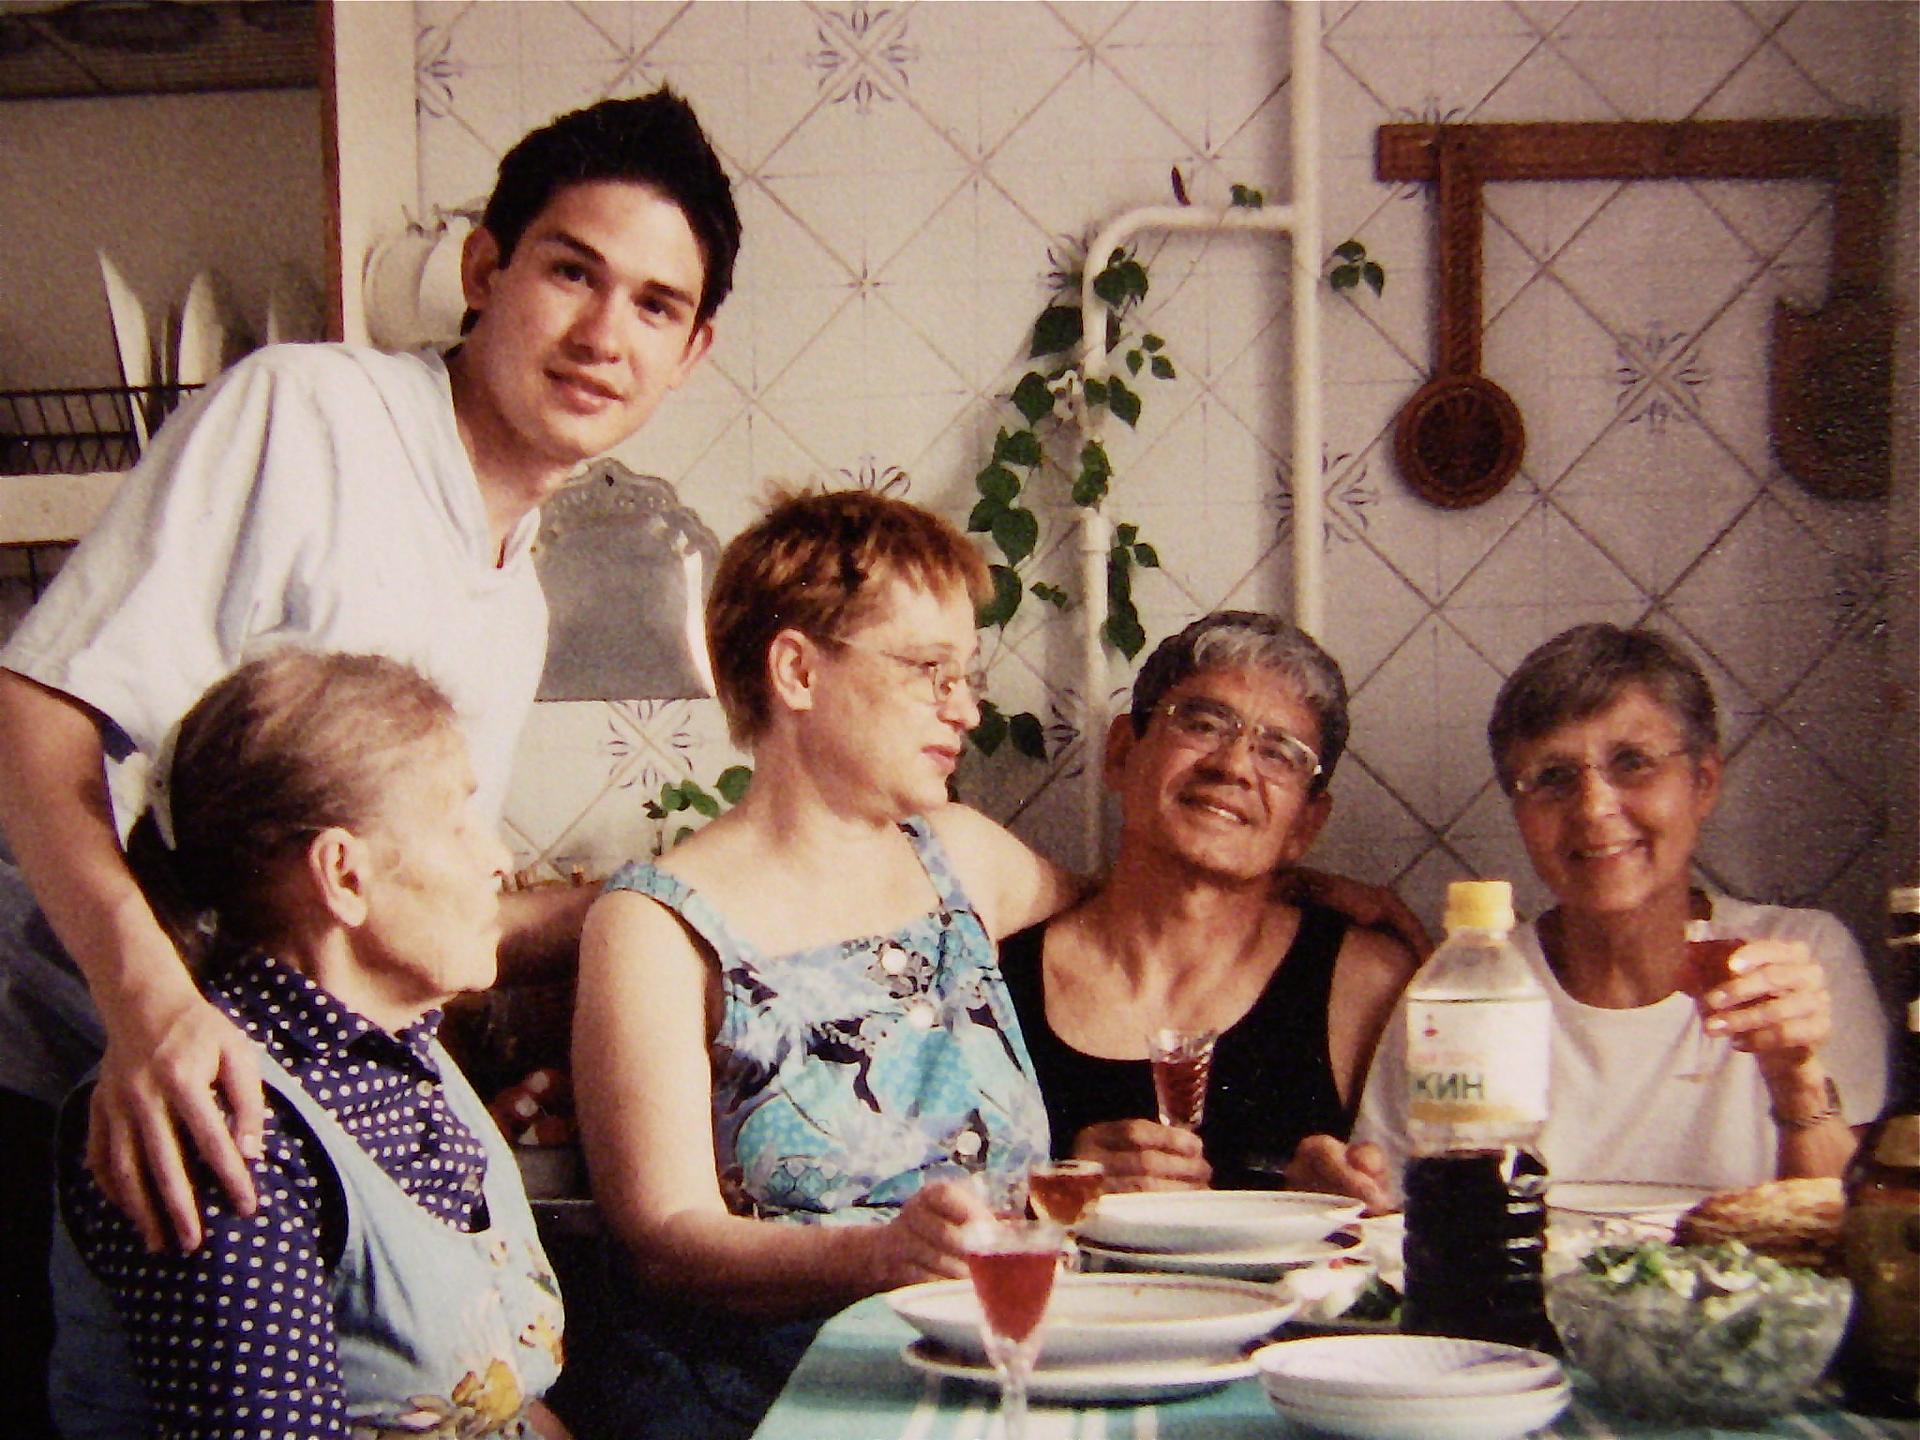 (from left to right) Timur's grandmother Evdokia, Timur with his parents Ludmila and Victor Bekbosunov, and his American mom Delora Donovan, in Almaty, Kazakhstan in 1997.